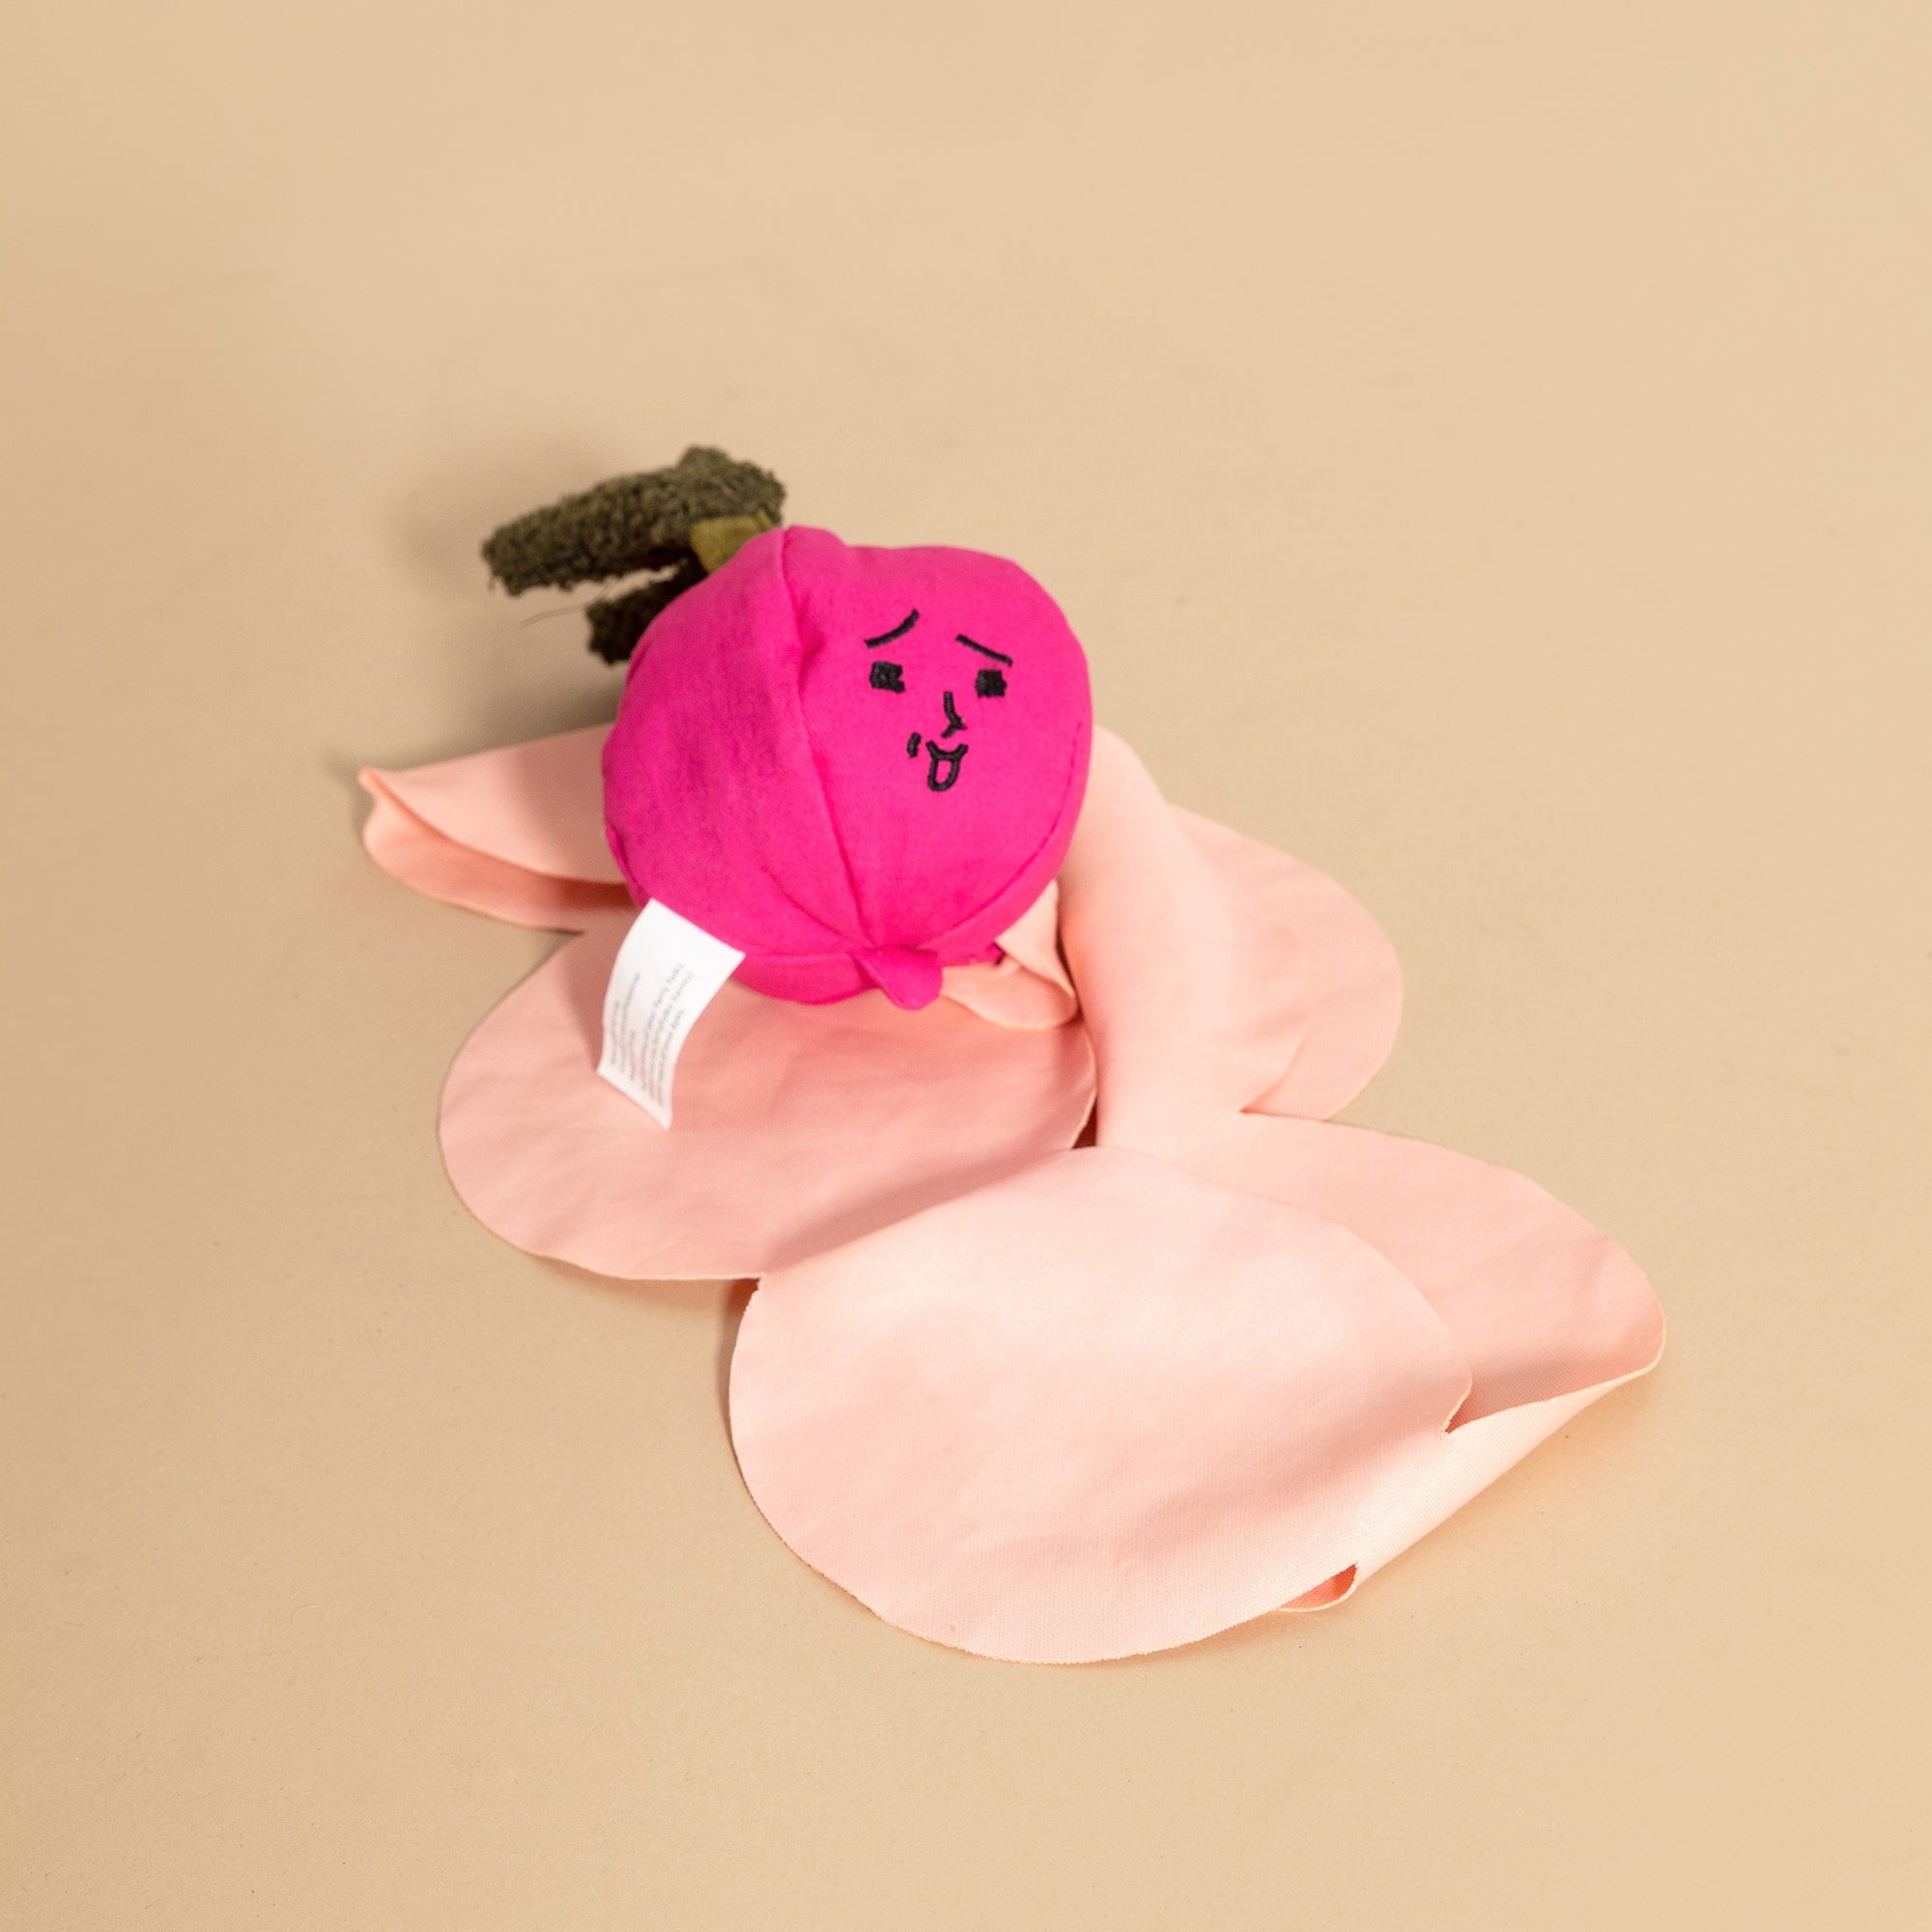 The image shows a pink radish-shaped dog toy with a sleepy face and leaf-like extensions, set against a tan background. It features a vibrant pink bulb and contrasting green top, resembling a radish sprouting from the ground. The light pink elements suggest petals, adding a whimsical touch to the toy's design. A visible tag indicates the toy's commercial branding or care instructions, emphasizing its crafted quality.